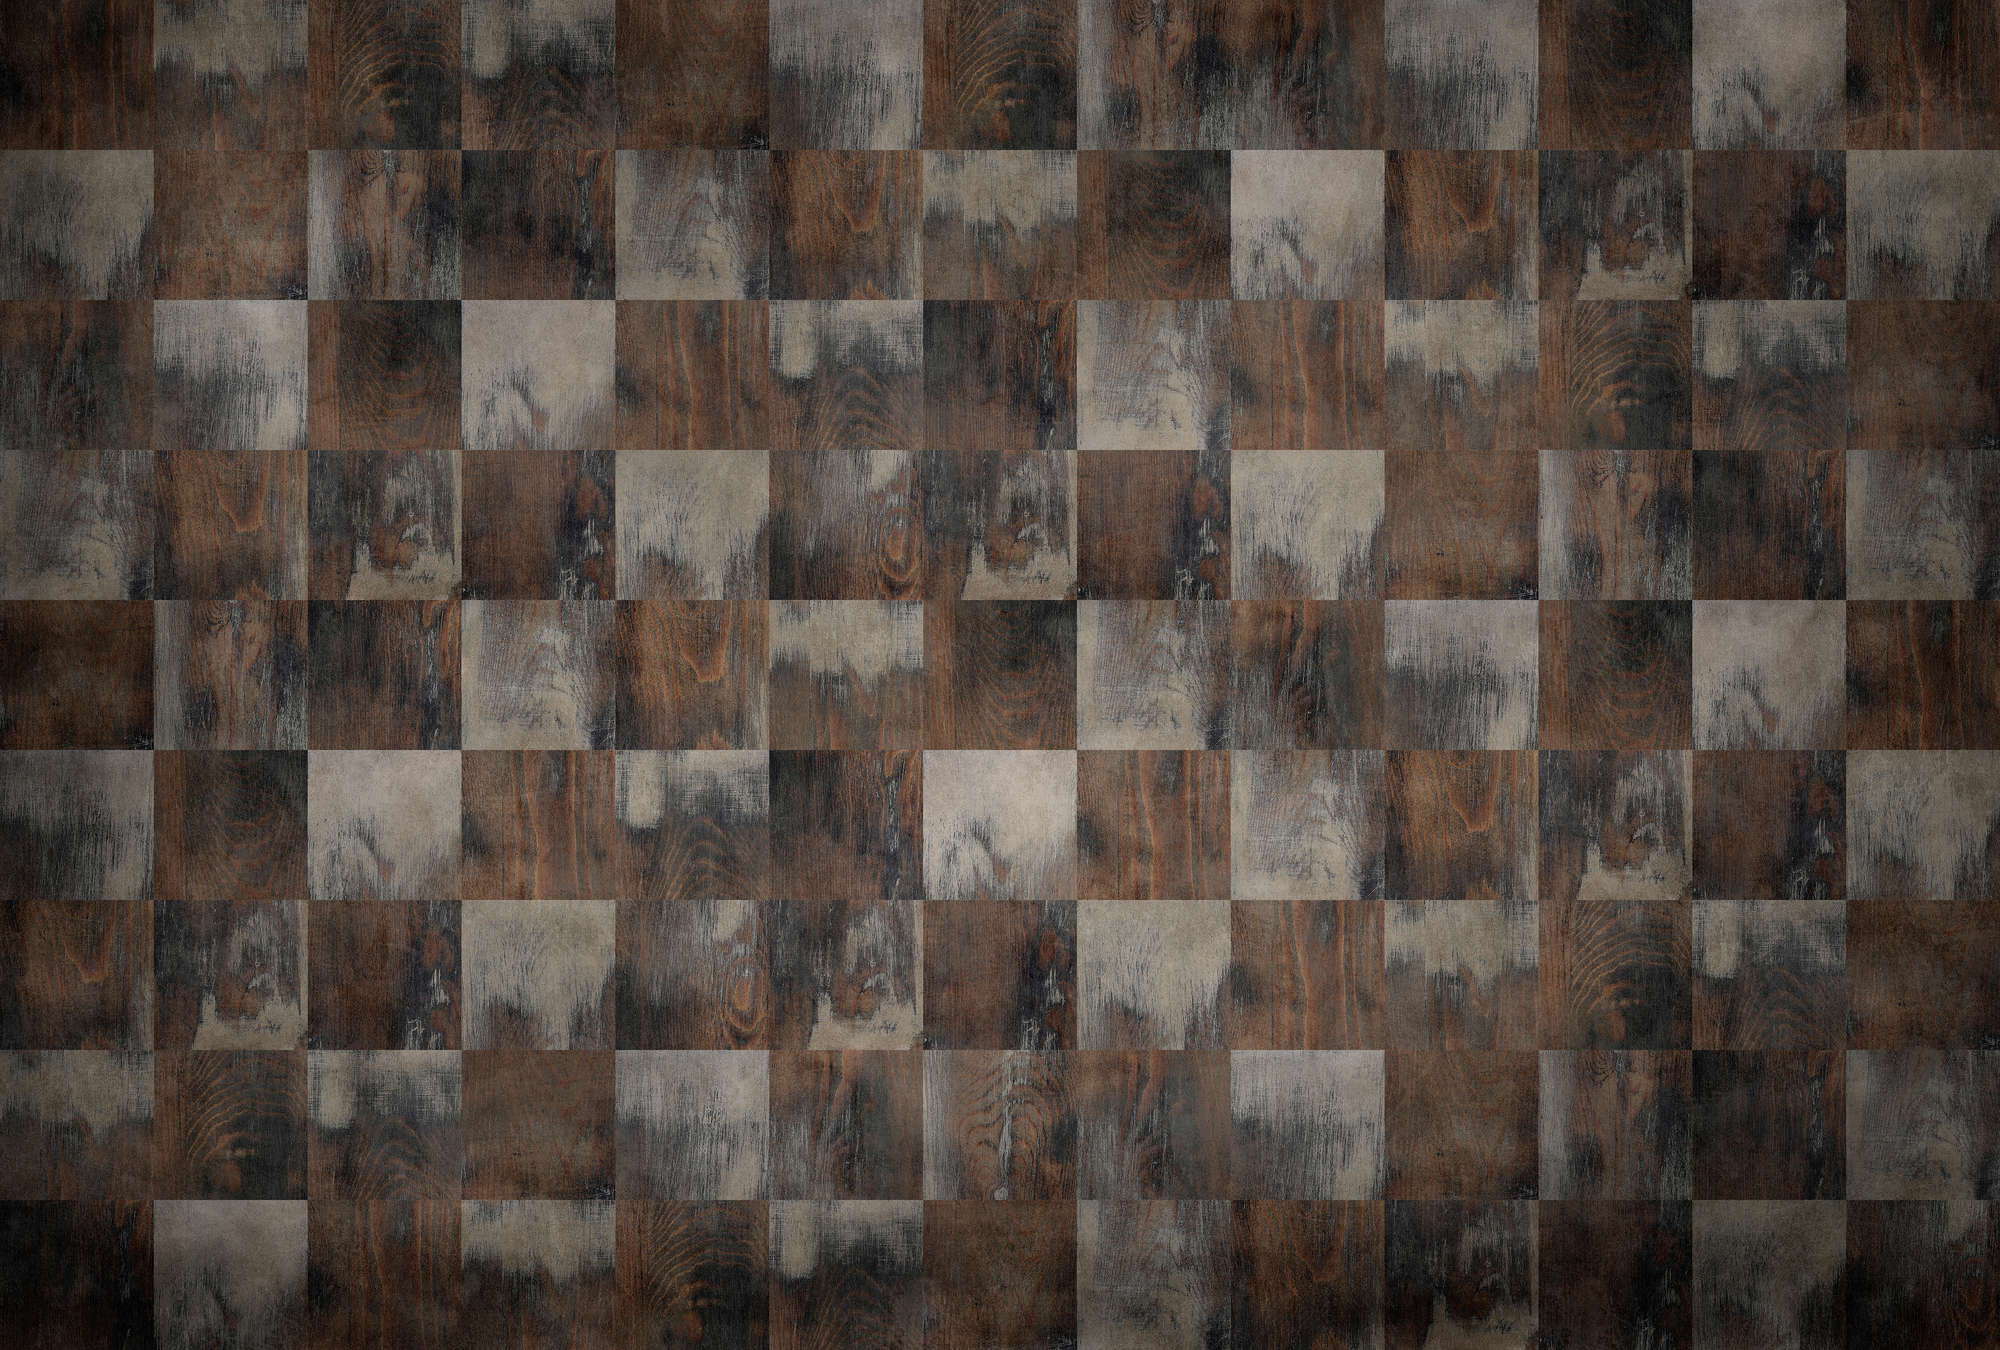             Factory 2 - wood optics photo wallpaper checkerboard pattern in used look
        